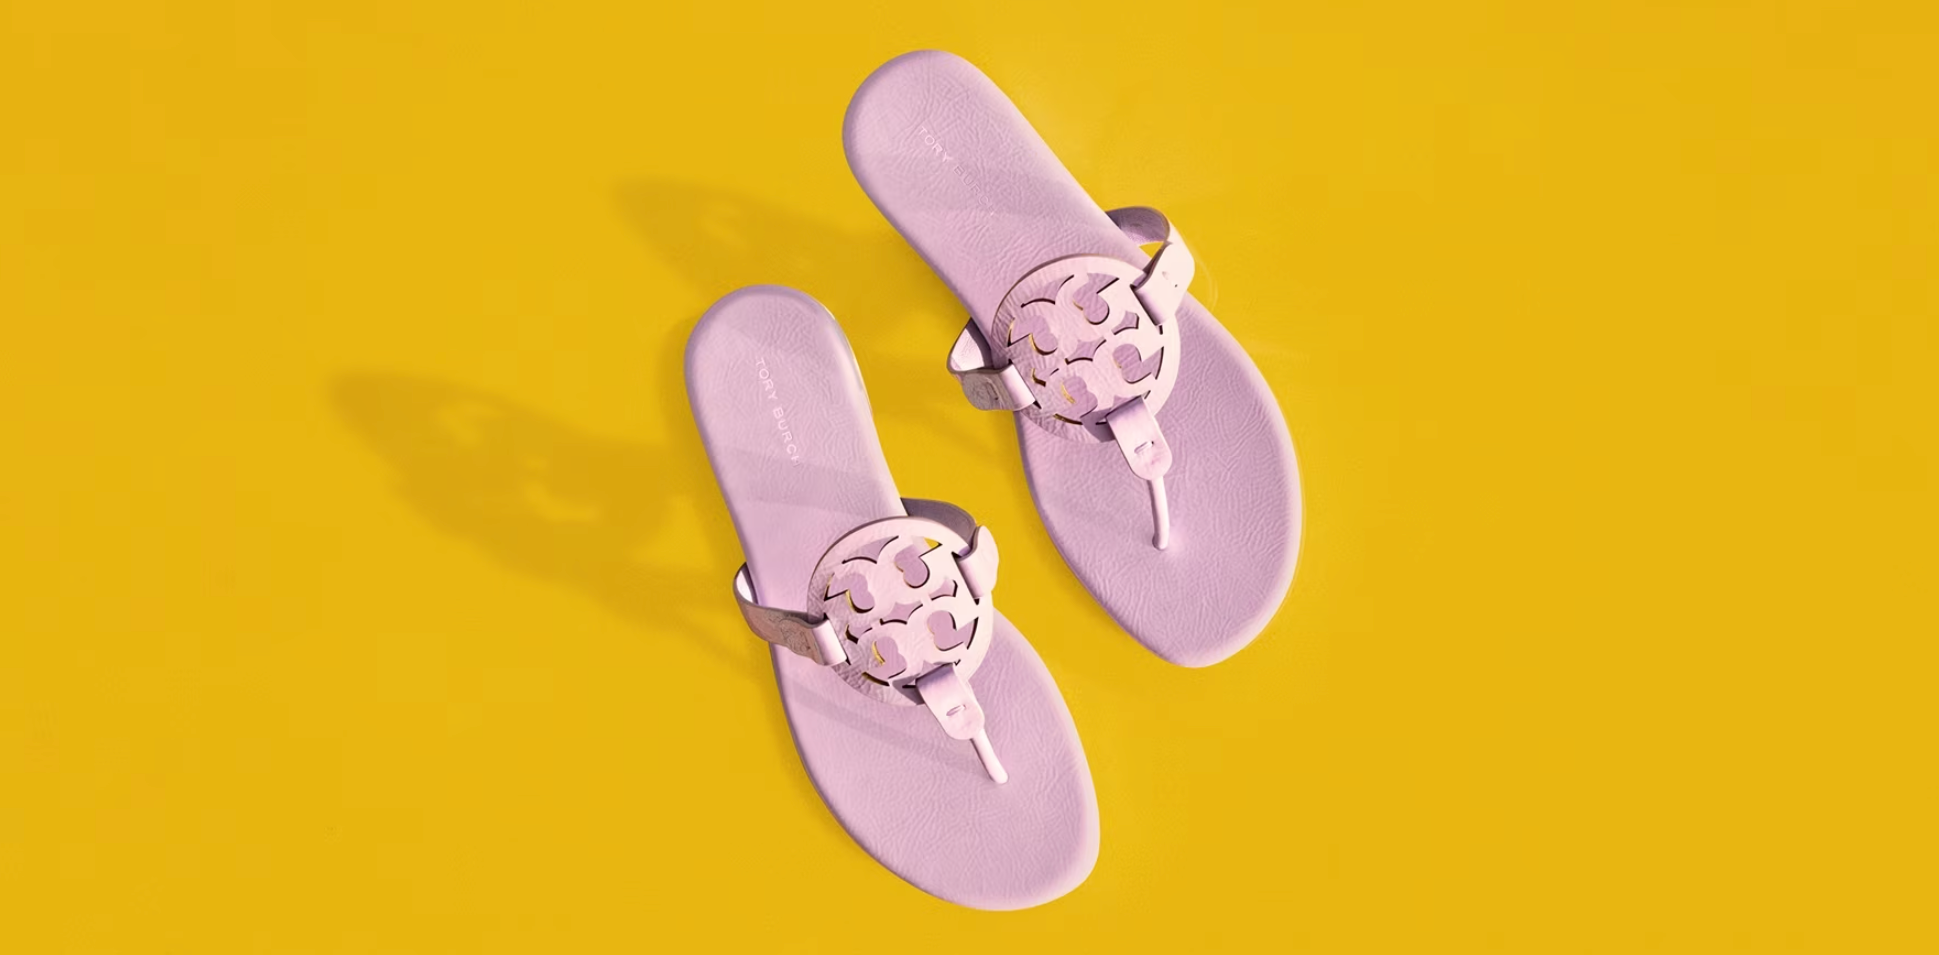 Tory Burch Released Pink Miller Sandals That Are Perfect for Spring 2023 |  Entertainment Tonight